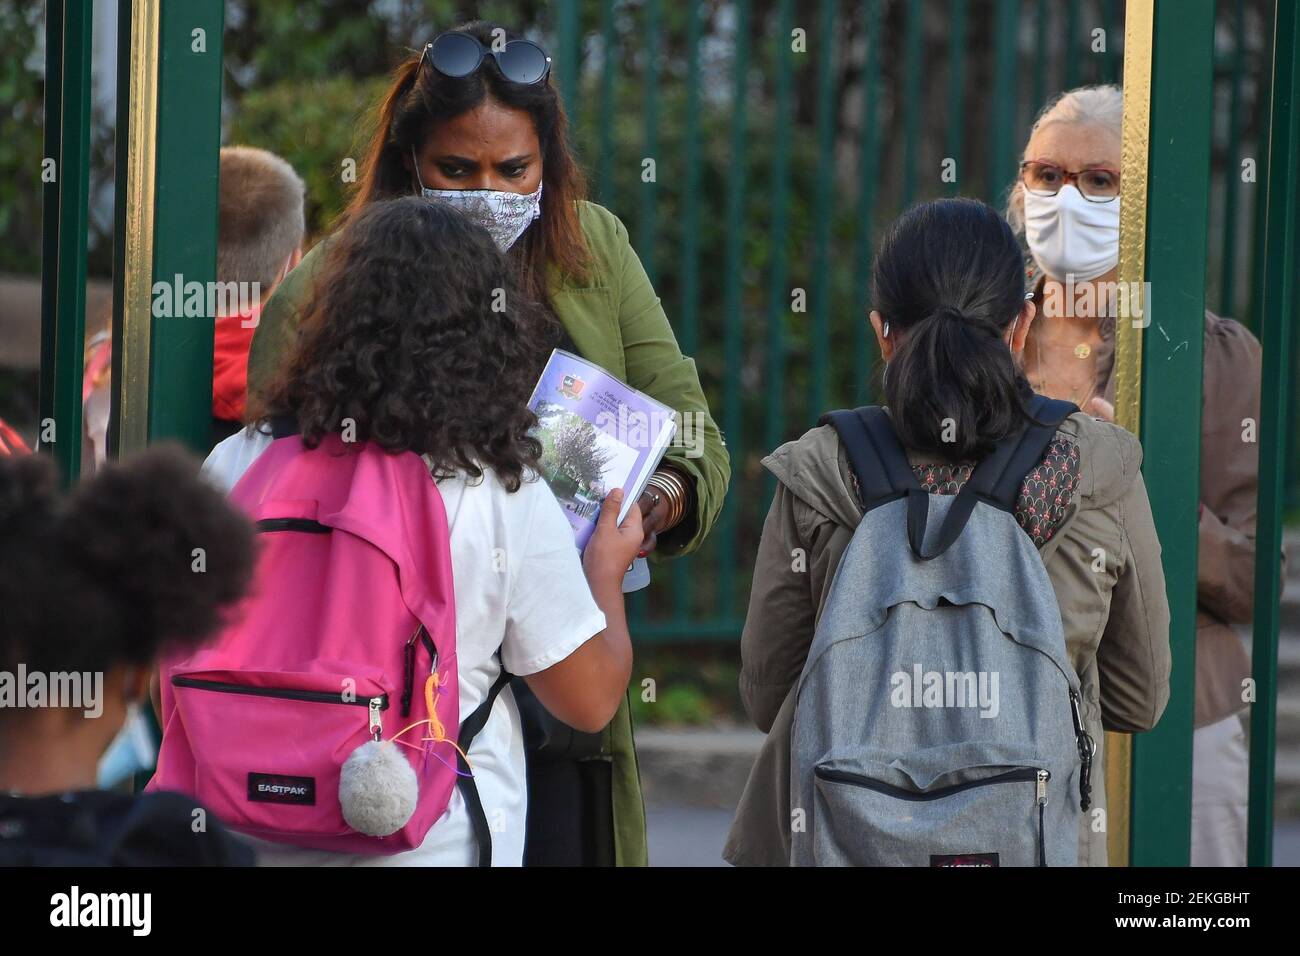 Students returns back to school during the Covid-19 pandemic in the college la Cerisaie in Charenton-le-Pont, Val de Marne, France on September 2, 2020. (Photo by Lionel Urman/Sipa USA) Stock Photo